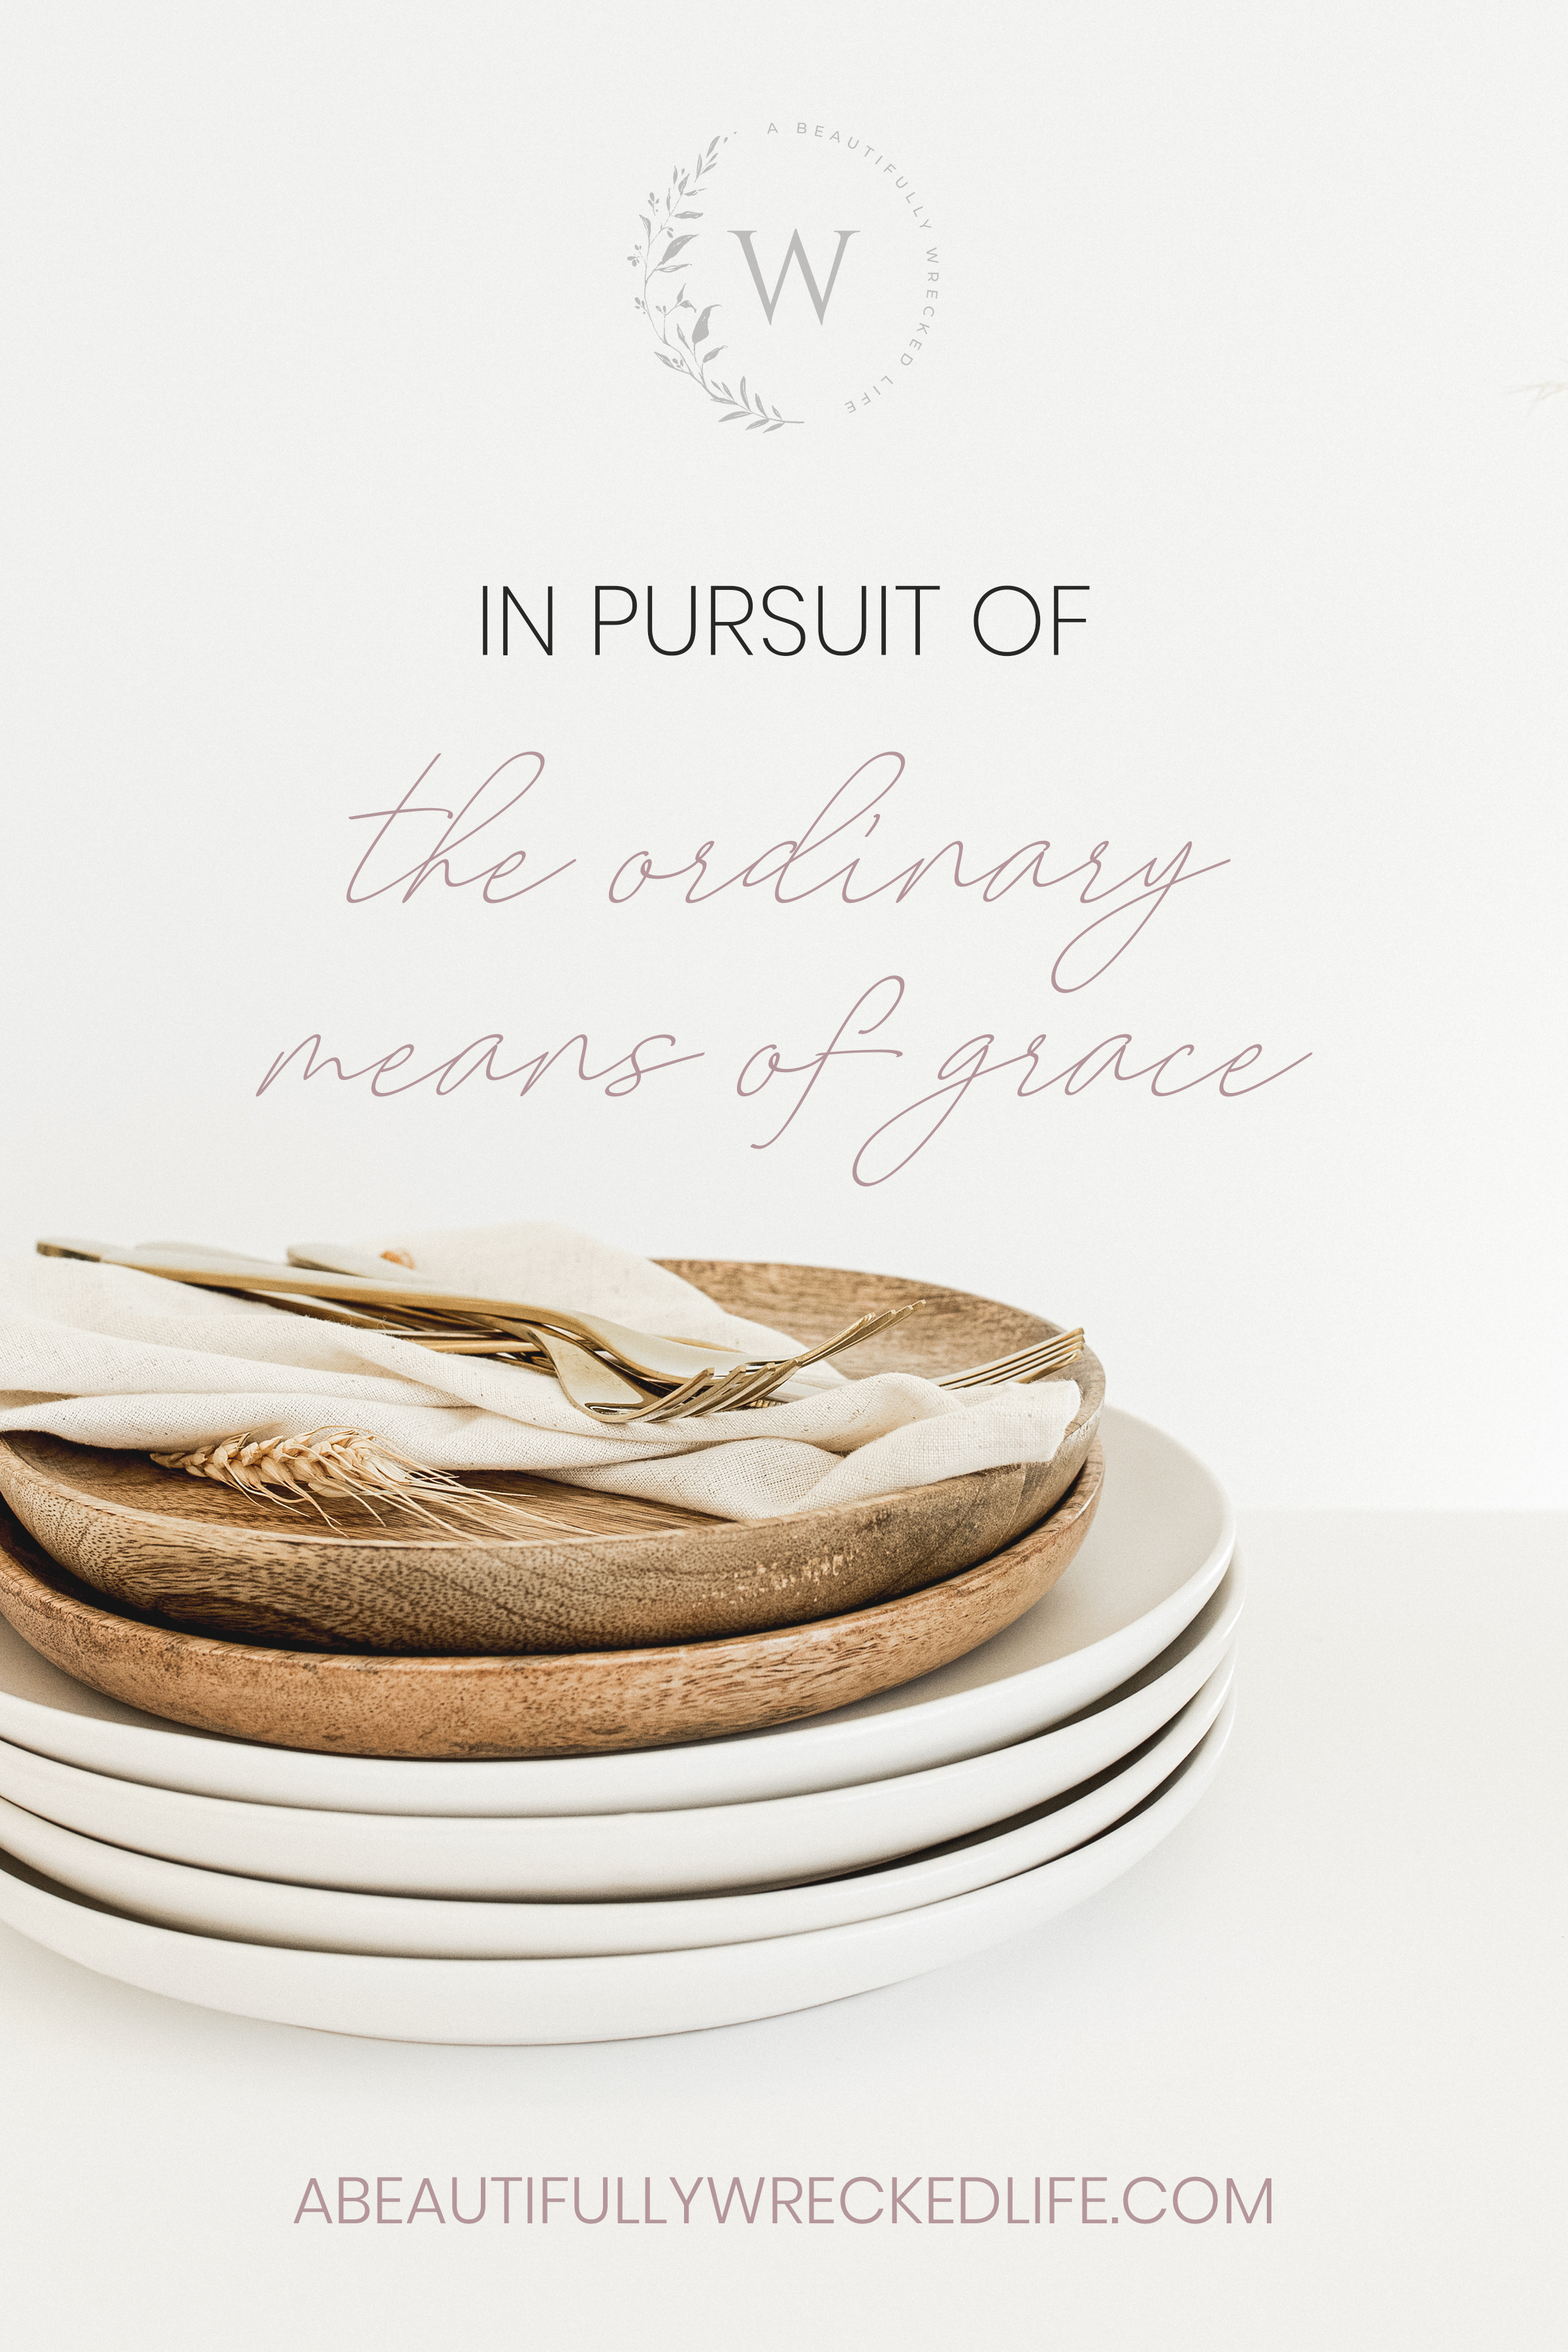 In Pursuit of the Ordinary Means of Grace